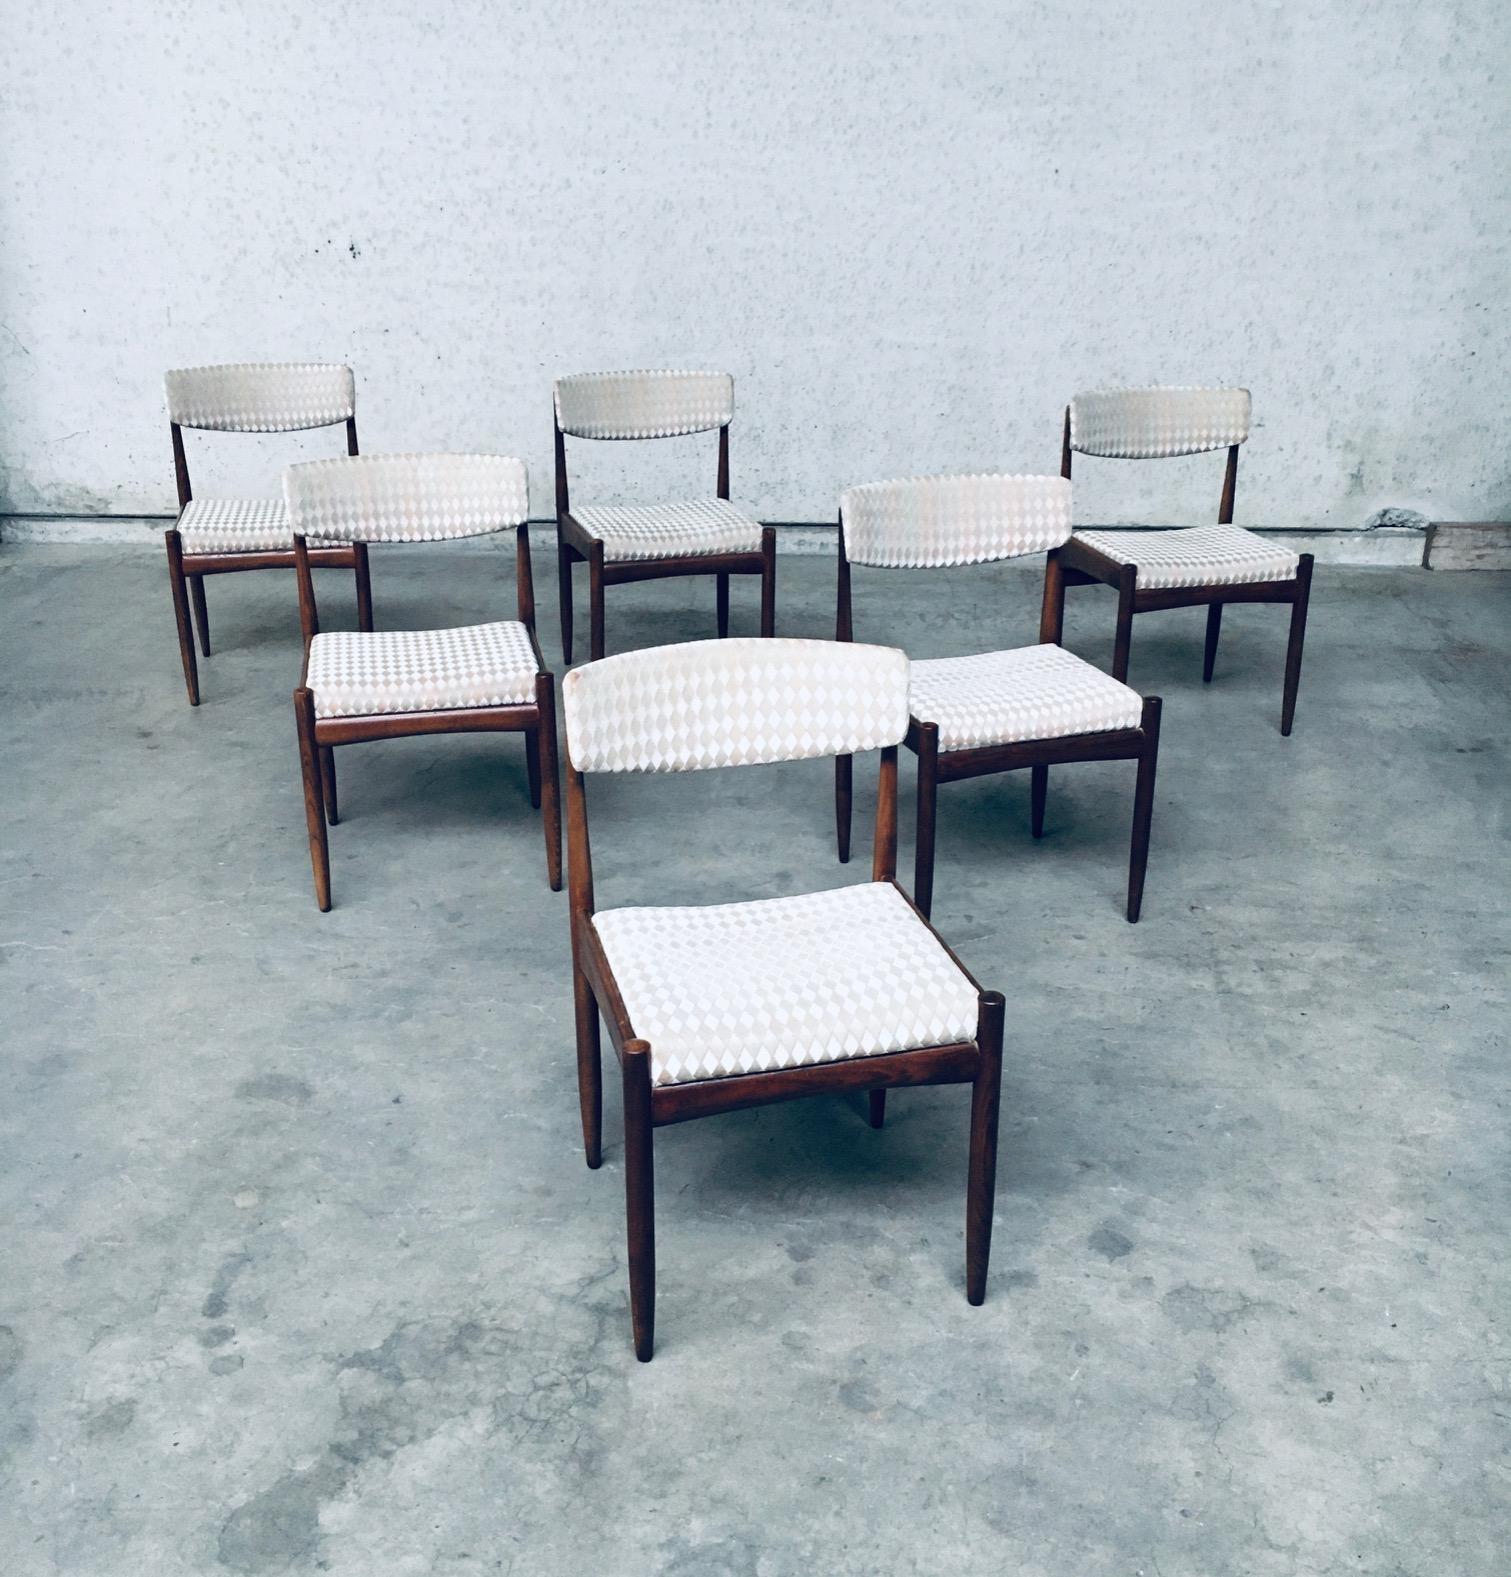 Vintage Mid-Century Modern Scandinavian Design Teak Dining Chair set of 6, made in Denmark, in the 1960's period. Teak wood construction frame with checkered beige fabric seats and back. All chairs are in very good original condition. Each chair